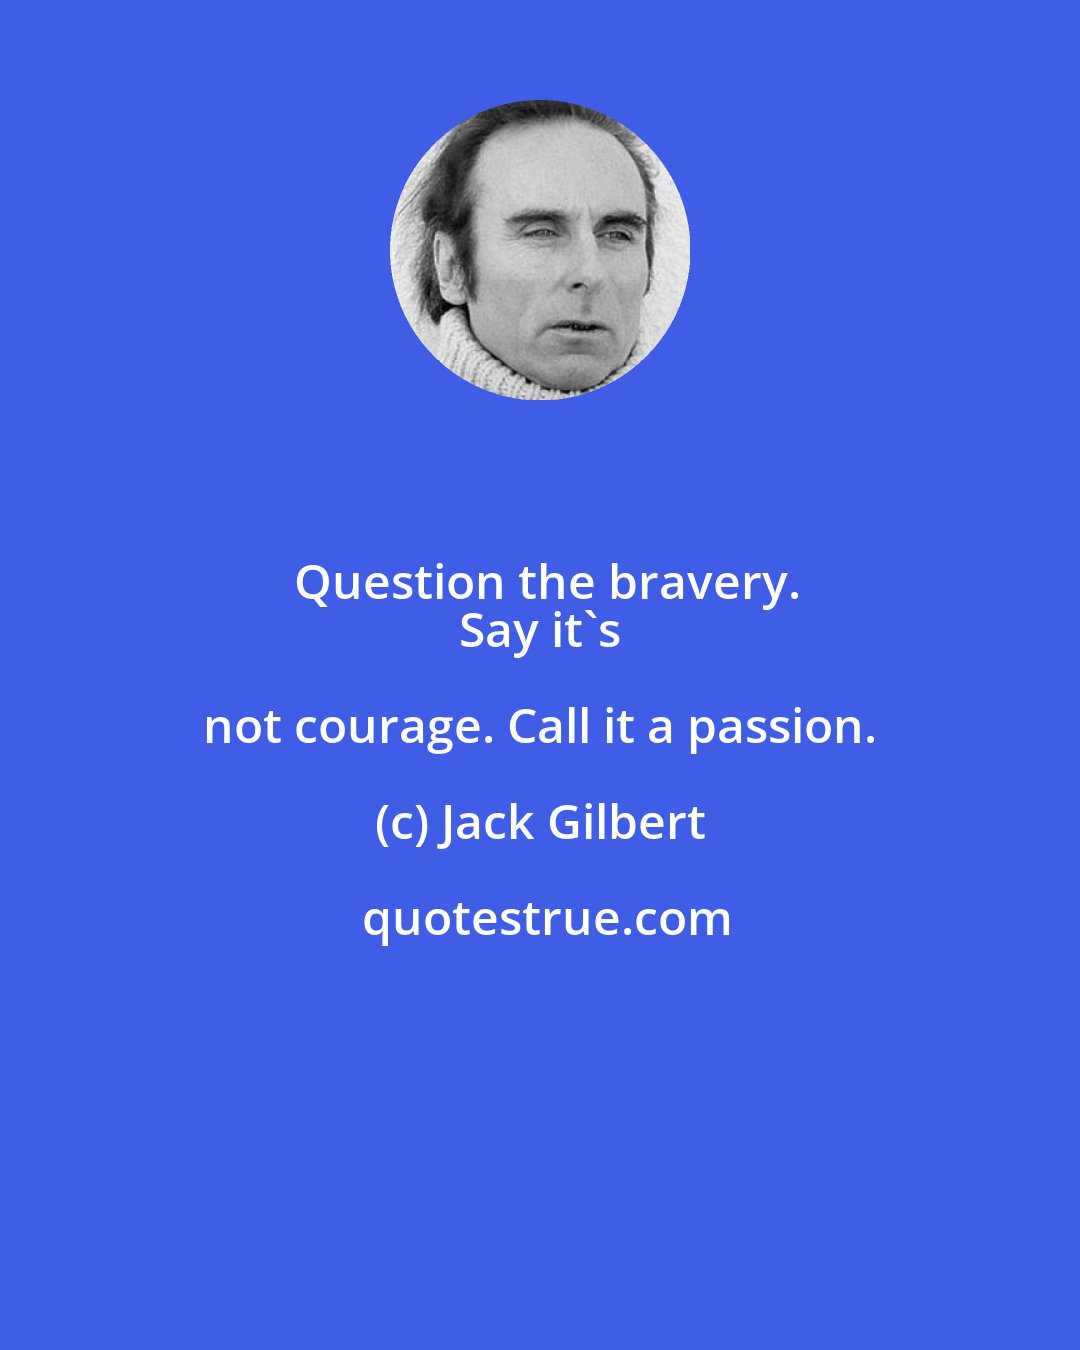 Jack Gilbert: Question the bravery.
 Say it's not courage. Call it a passion.